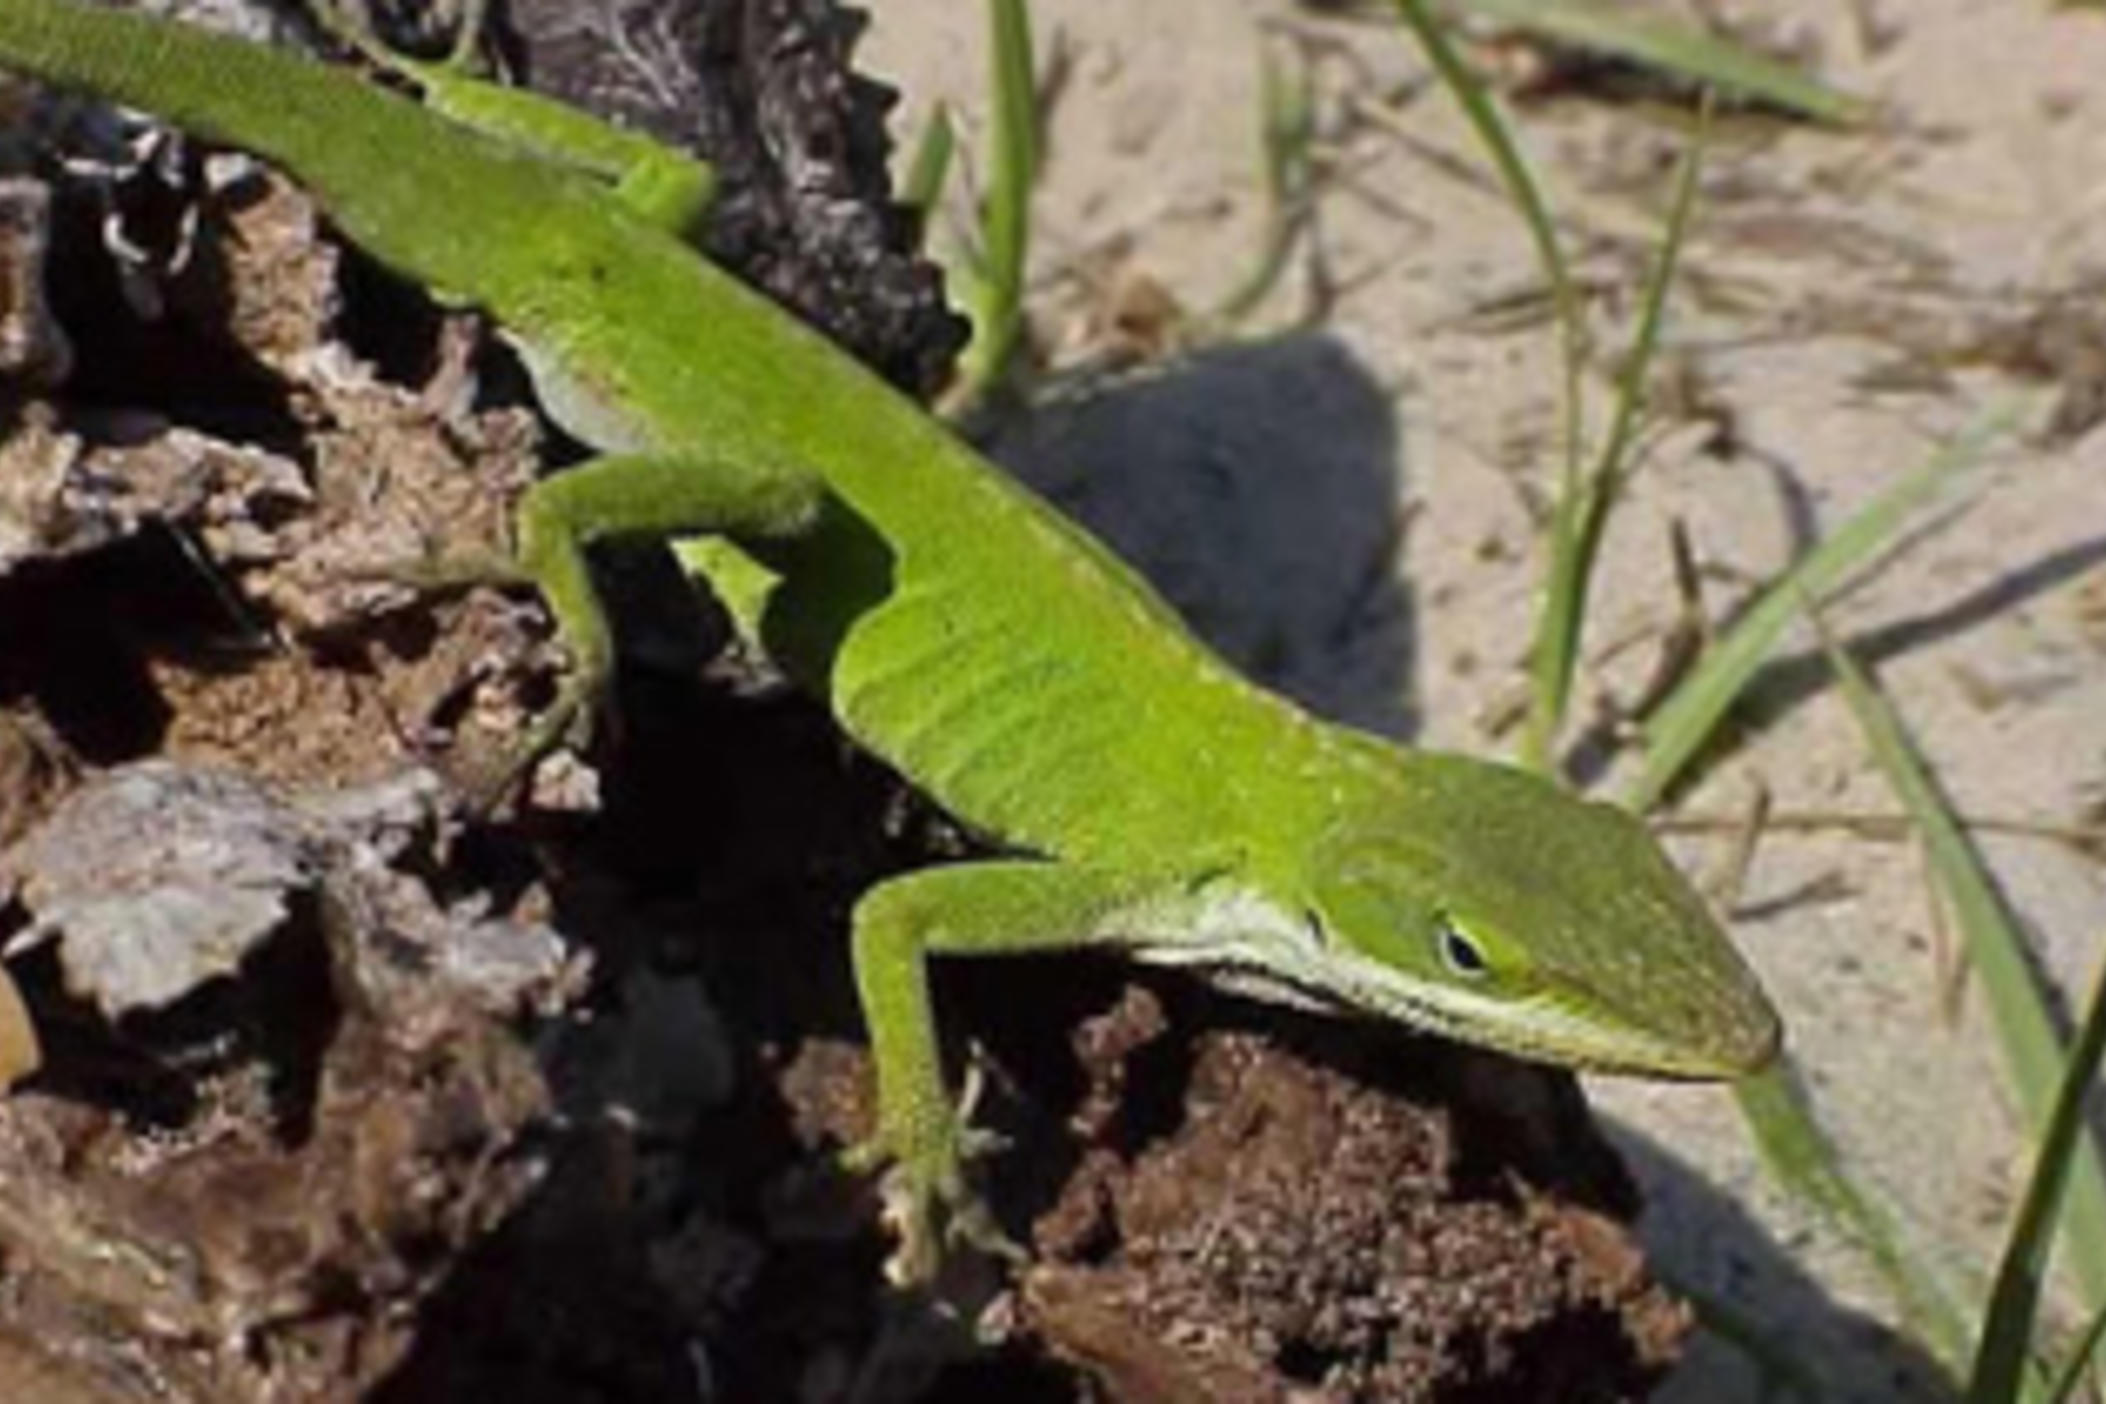 The green anole lizard is found across the Southeastern U.S. and is especially prevalent in Georgia and South Carolina.